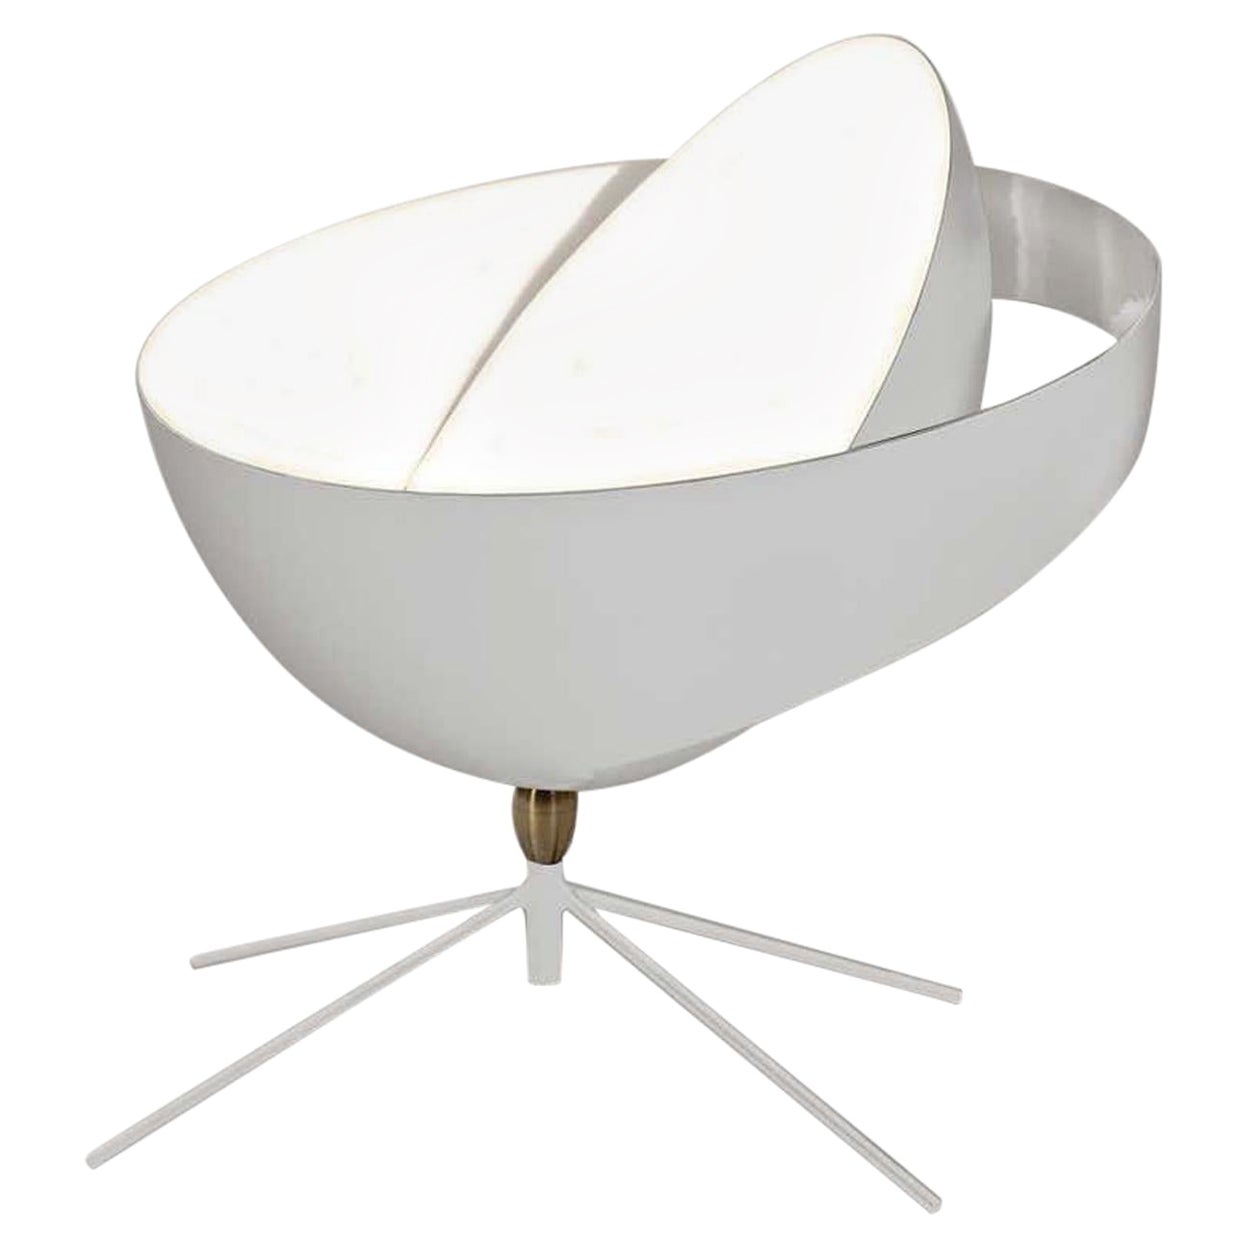 Serge Mouille "Saturn" Table Lamp in White